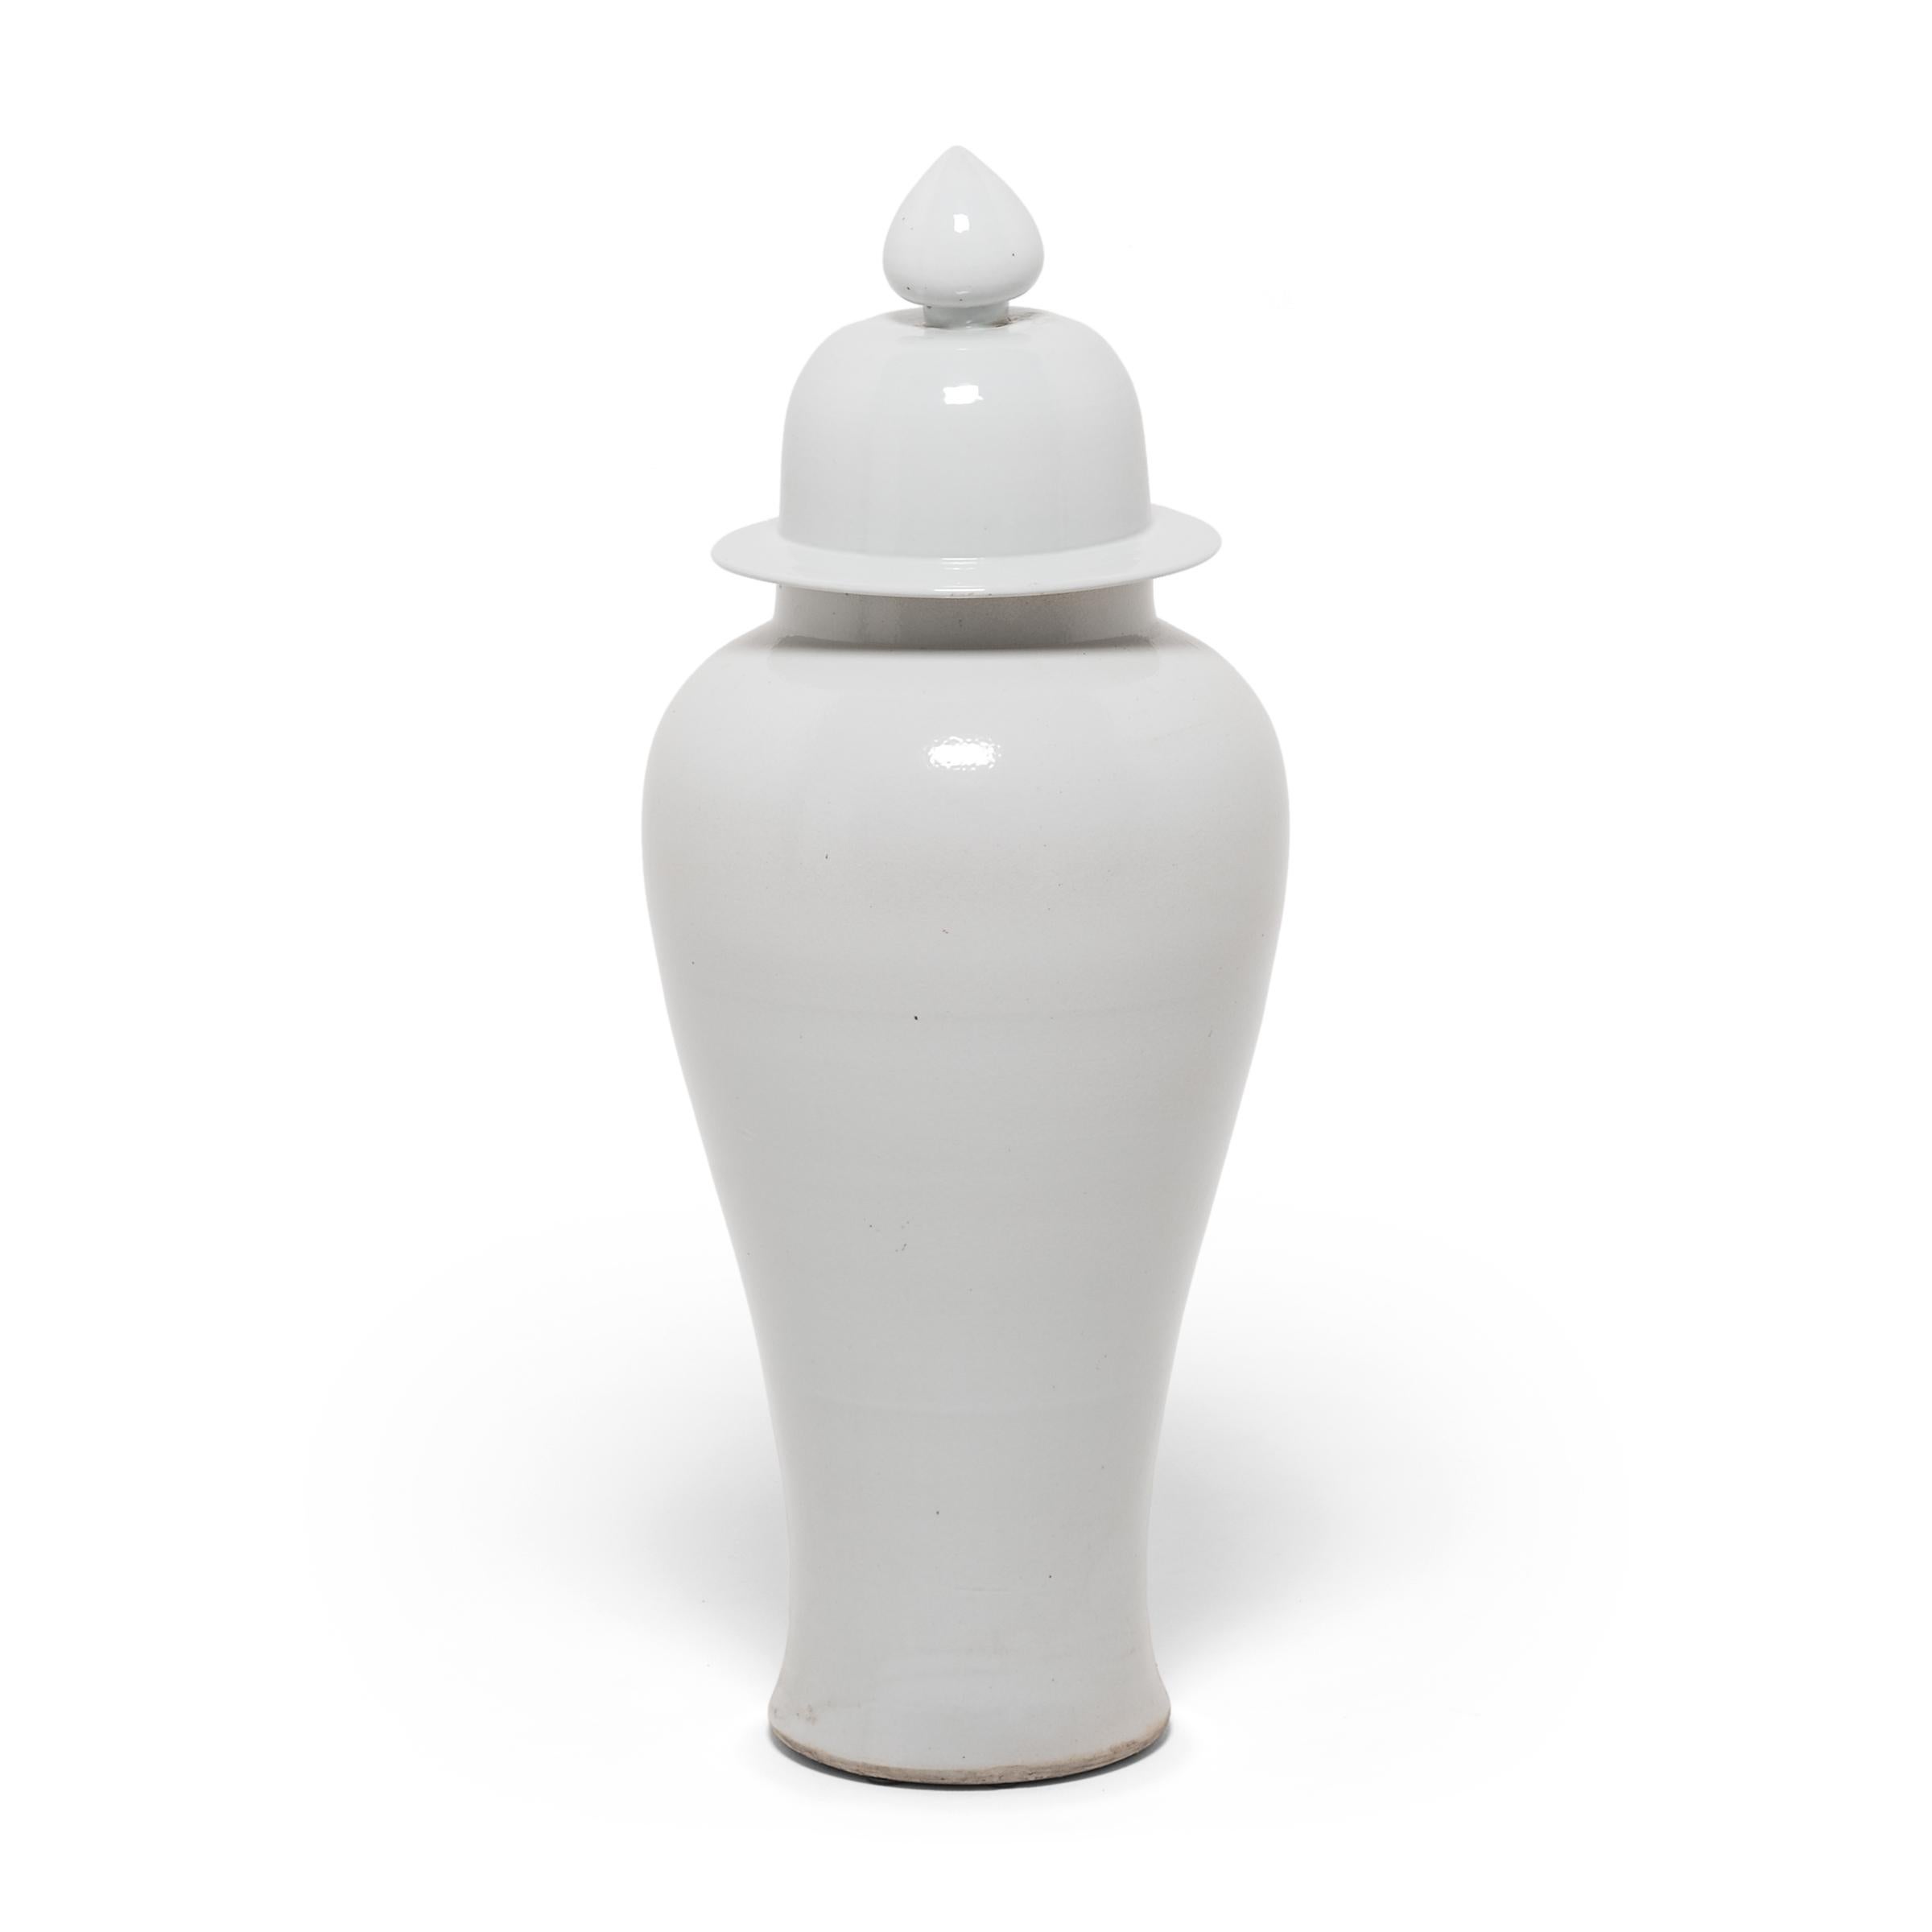 The striking pure creme color of this monumental lidded ceramic vase draws on a long Chinese tradition developed during the Song dynasty, when artisans began to develop the art of monochrome glazes in a single, statement-making color.

Additional